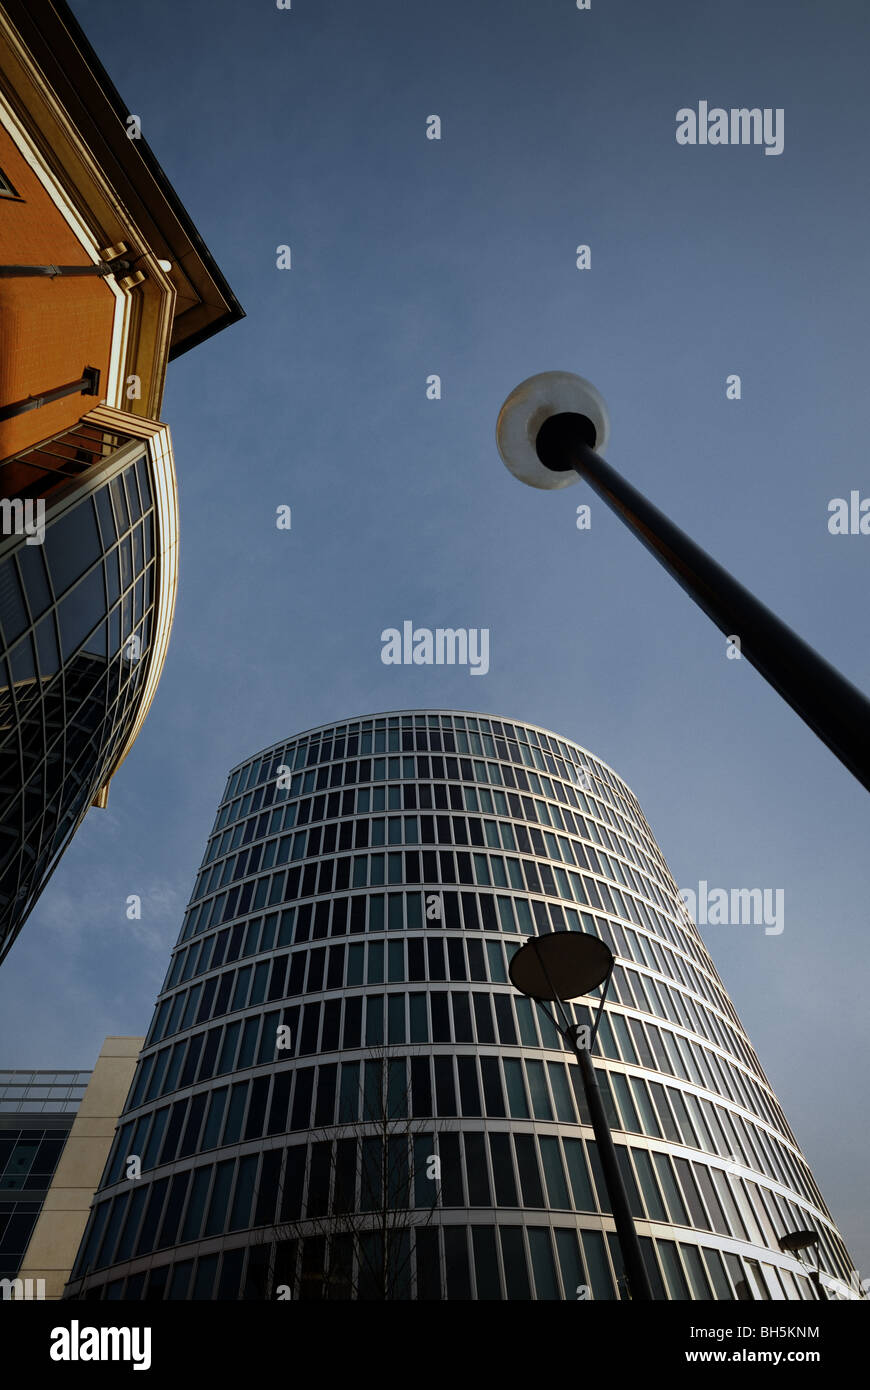 Vertical view of a sky with modern architecture and lamp posts rising up Stock Photo